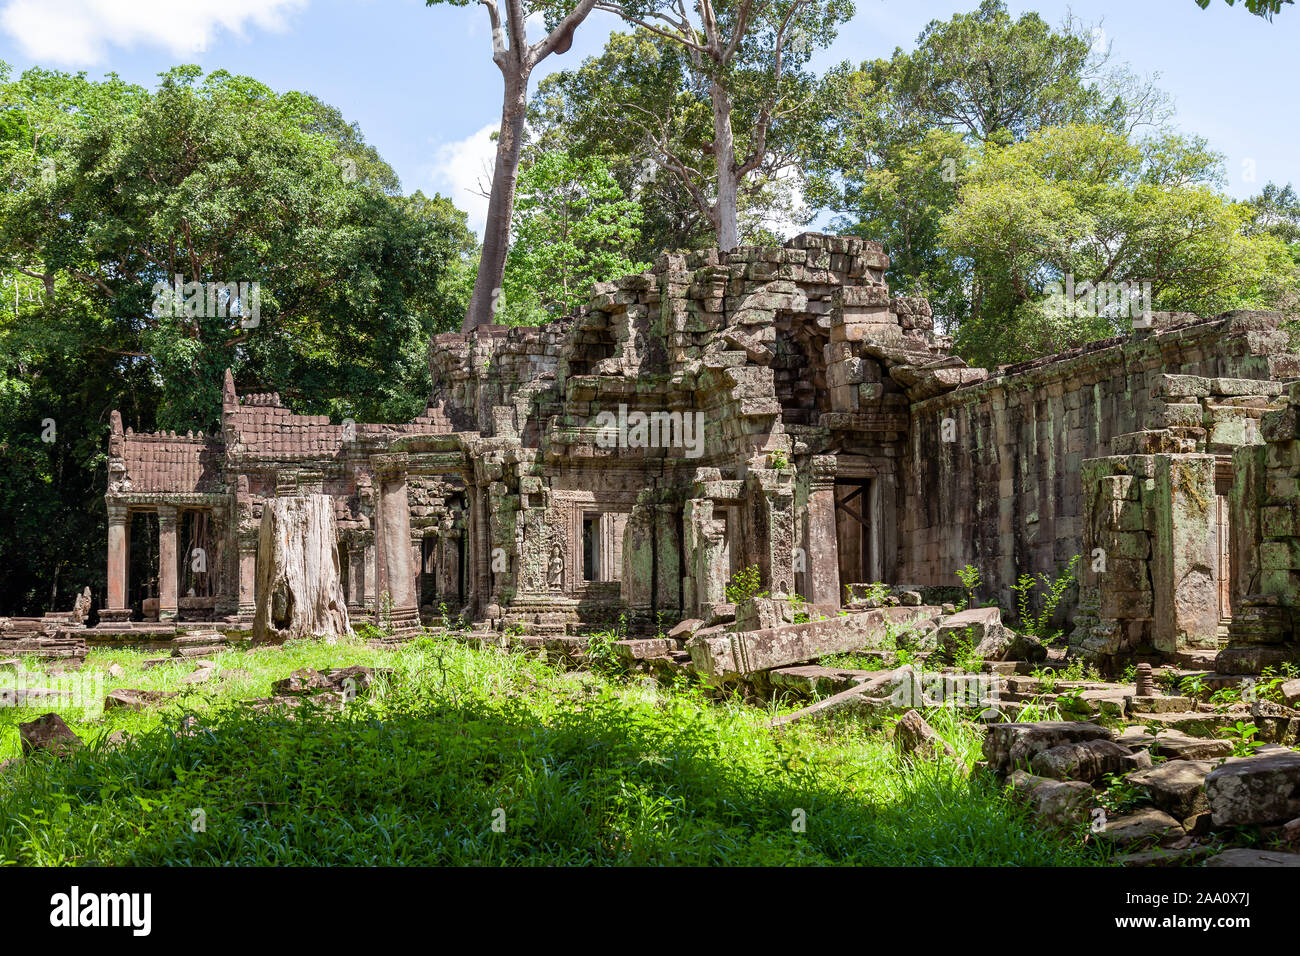 Preah Khan temple near Siem Reap, Cambodia. This temple looks very mystic with moss covering the stones. A big spung tree is famous for this temple. Stock Photo